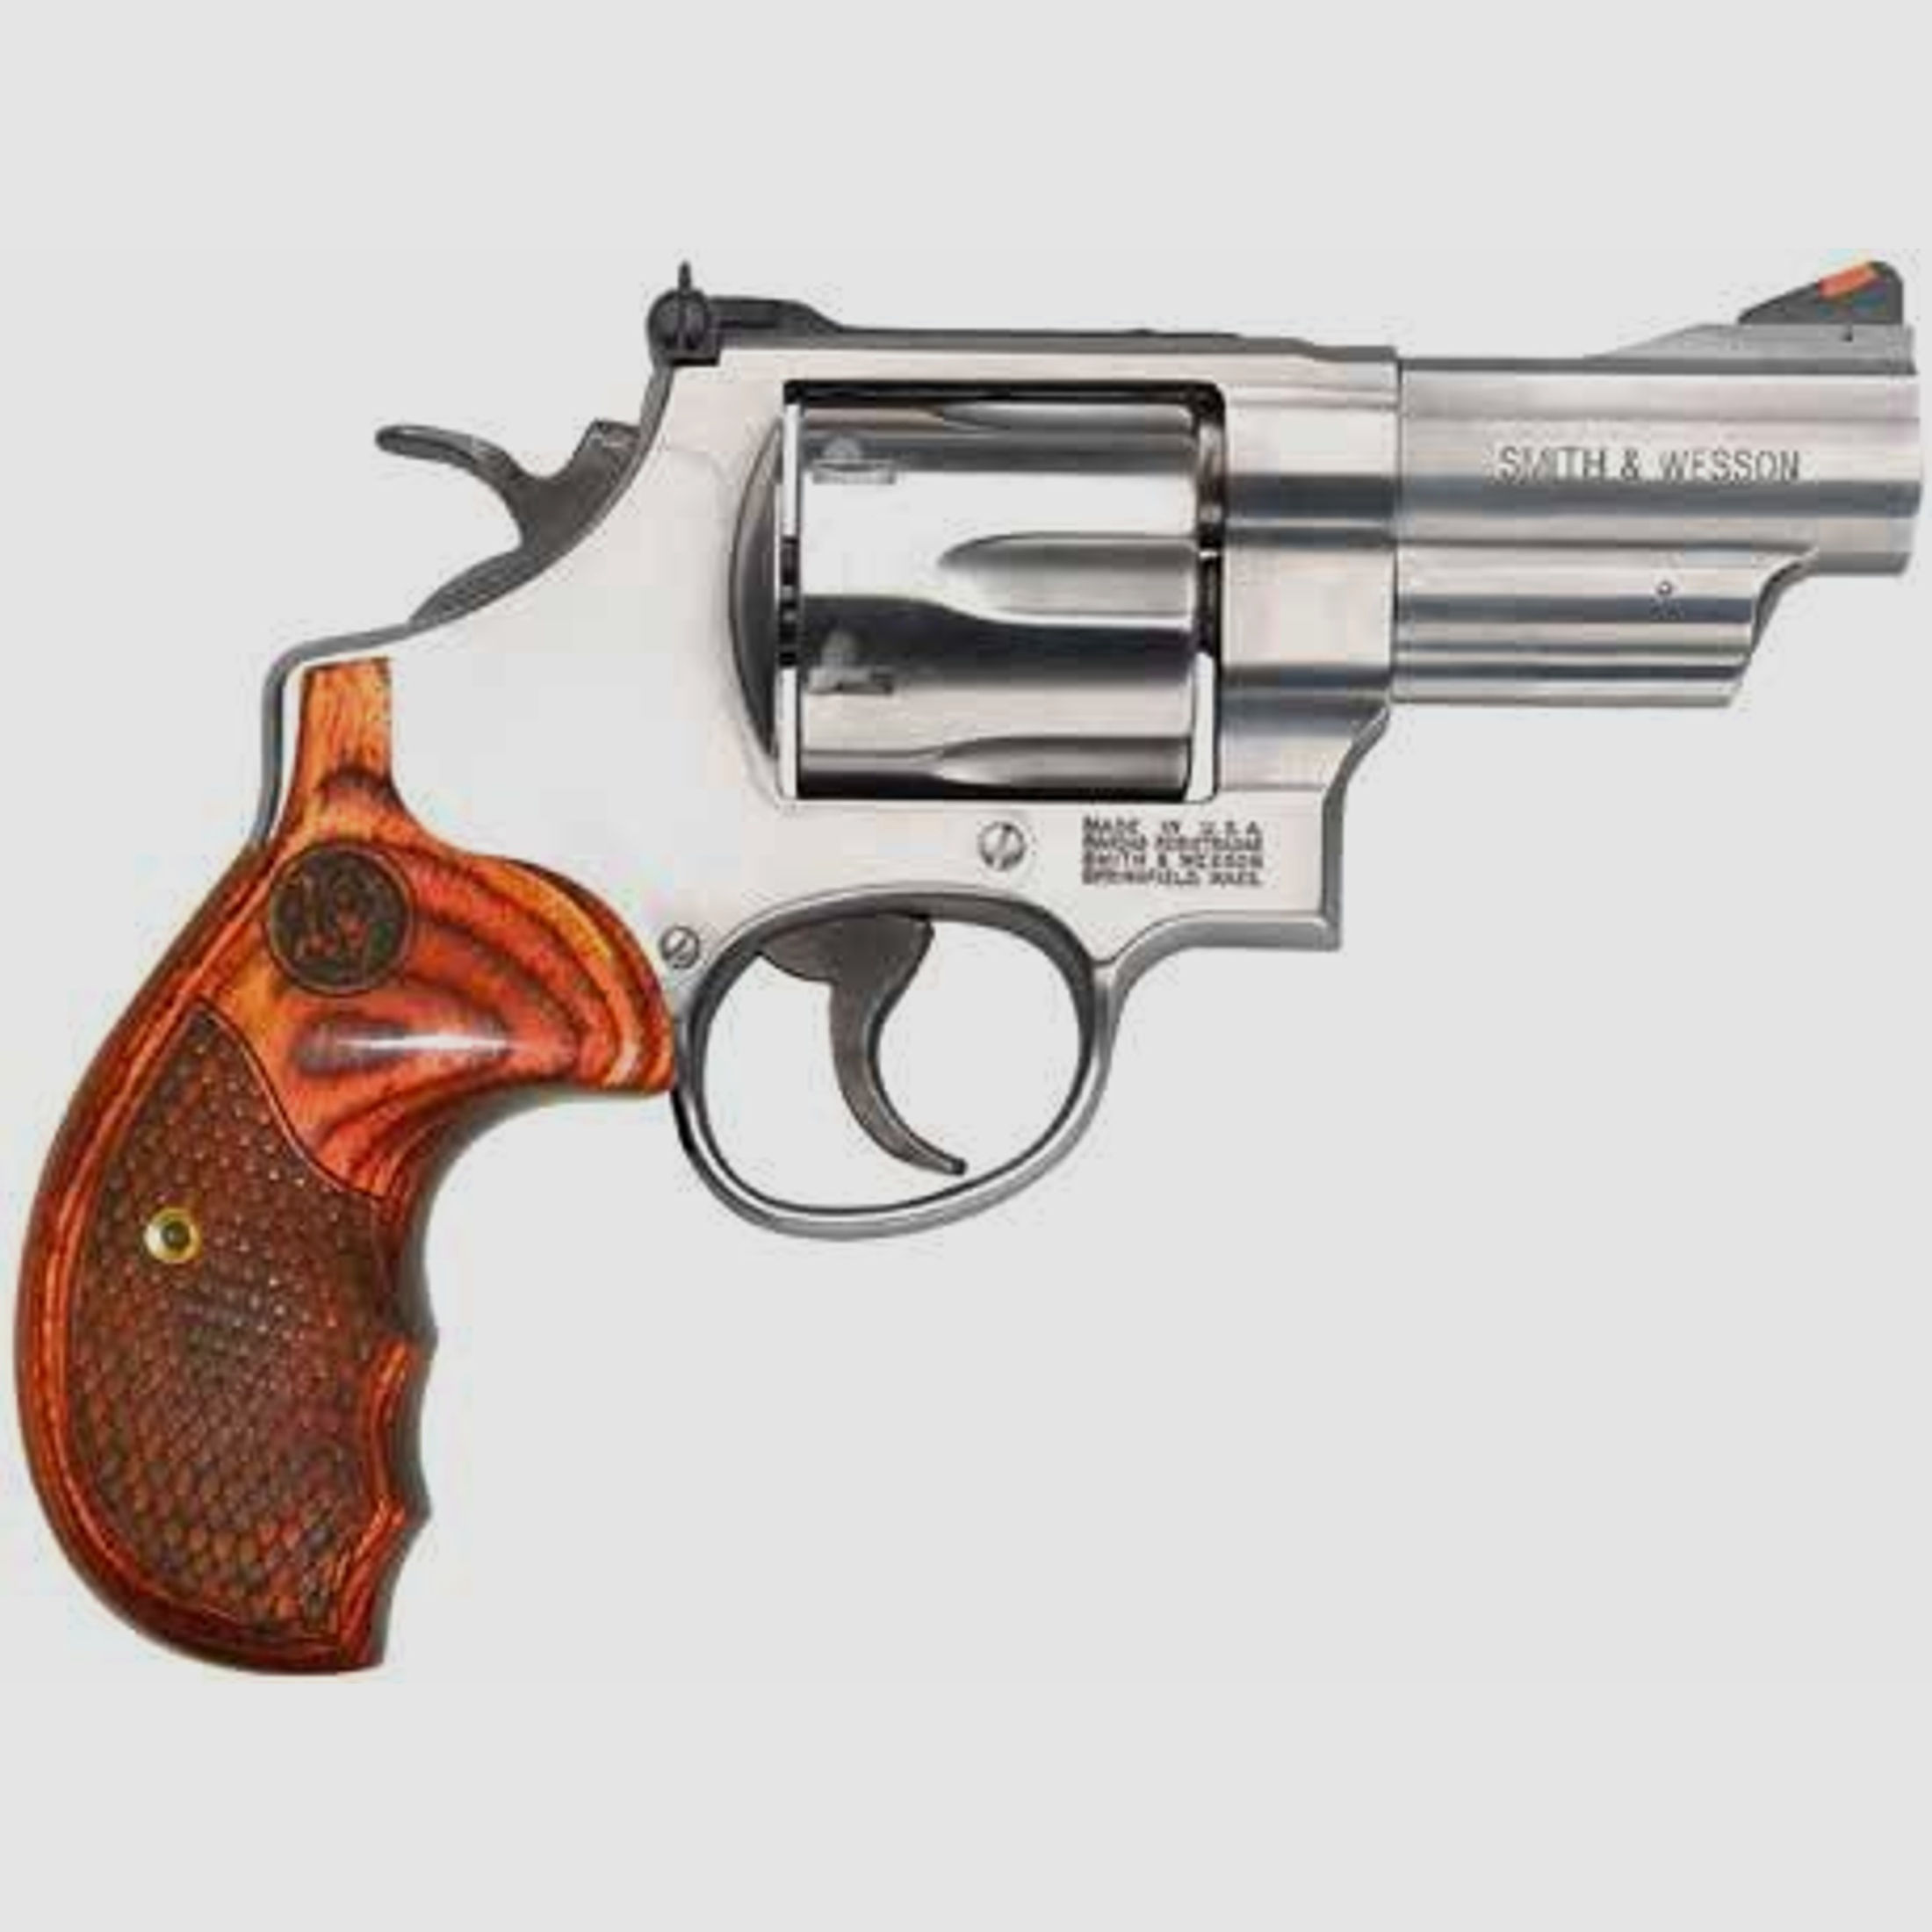 SMITH & WESSON Revolver Mod. 629 -3' DeLuxe .44RemMag  RosenHolz-Griff